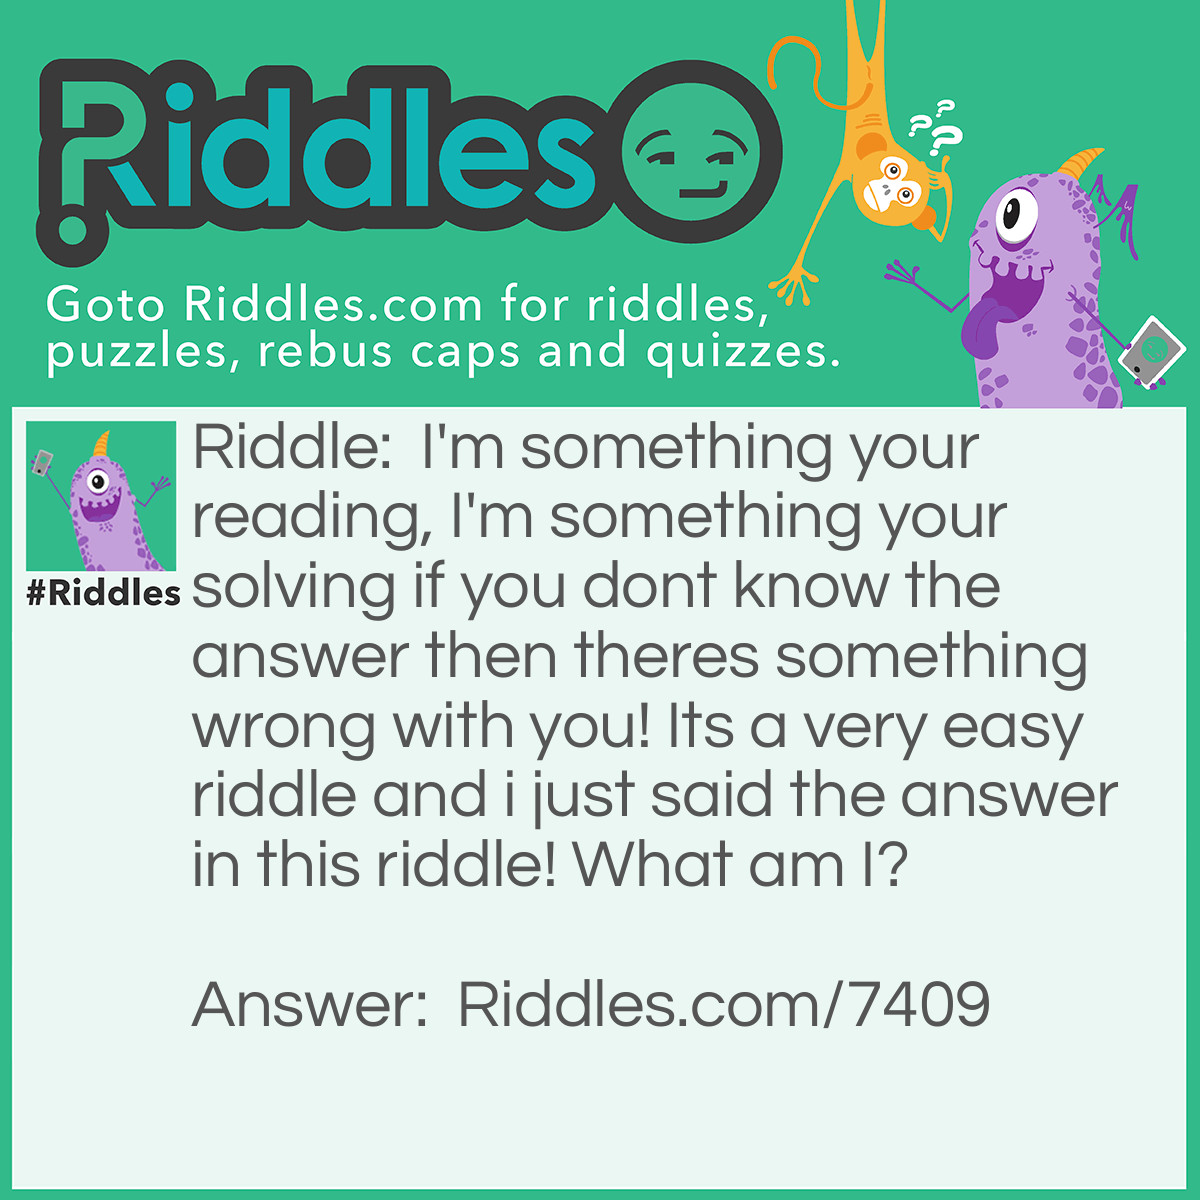 Riddle: I'm something you're reading, I'm something you're solving if you don't know the answer then there's something wrong with you! It's a very <a href="/easy-riddles">easy riddle</a> and I just said the answer in this riddle! What am I? Answer: The Riddle.